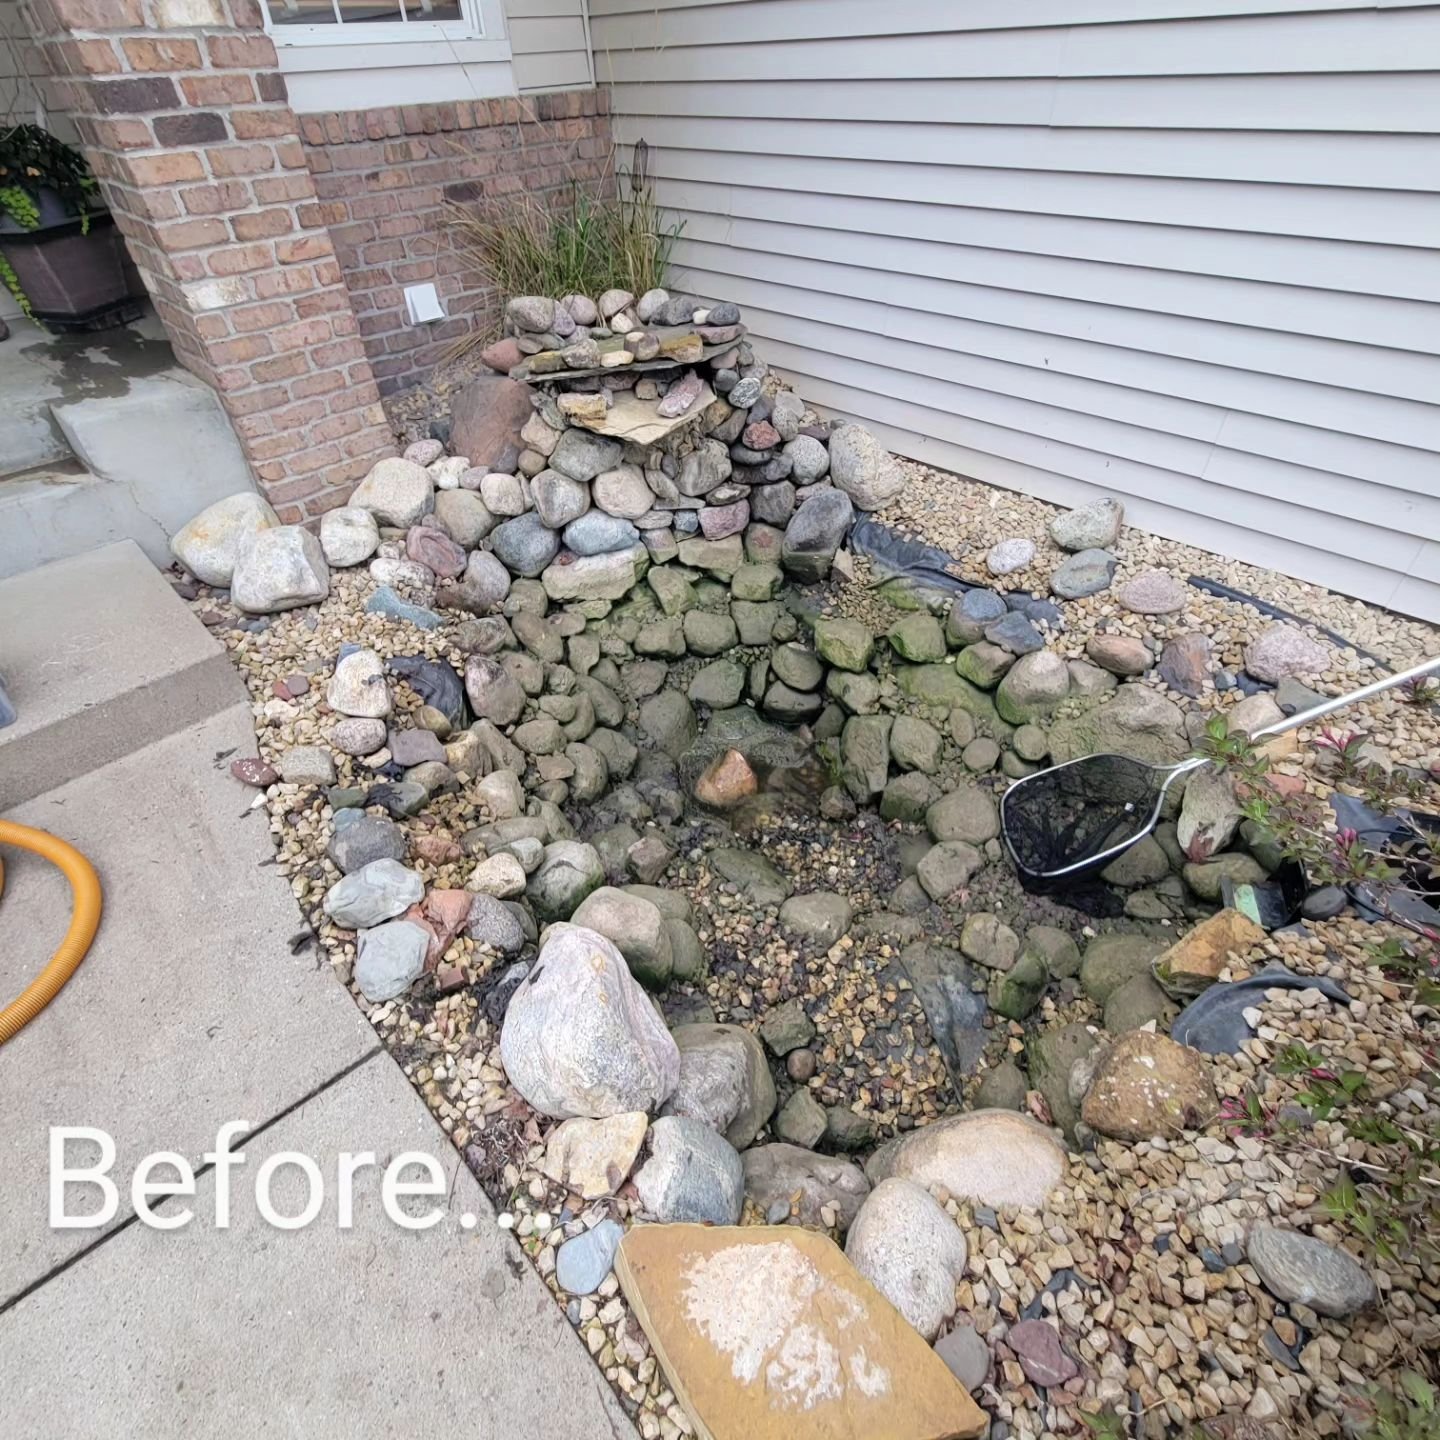 Here's that pond cleaning from yesterday up in Oakdale!
A bit of a haul, but these homeowners had their fish in a tank in their basement and had 3 weeks set aside for cleaning their pond. Time was of the essence... Came in and took care of it all in 